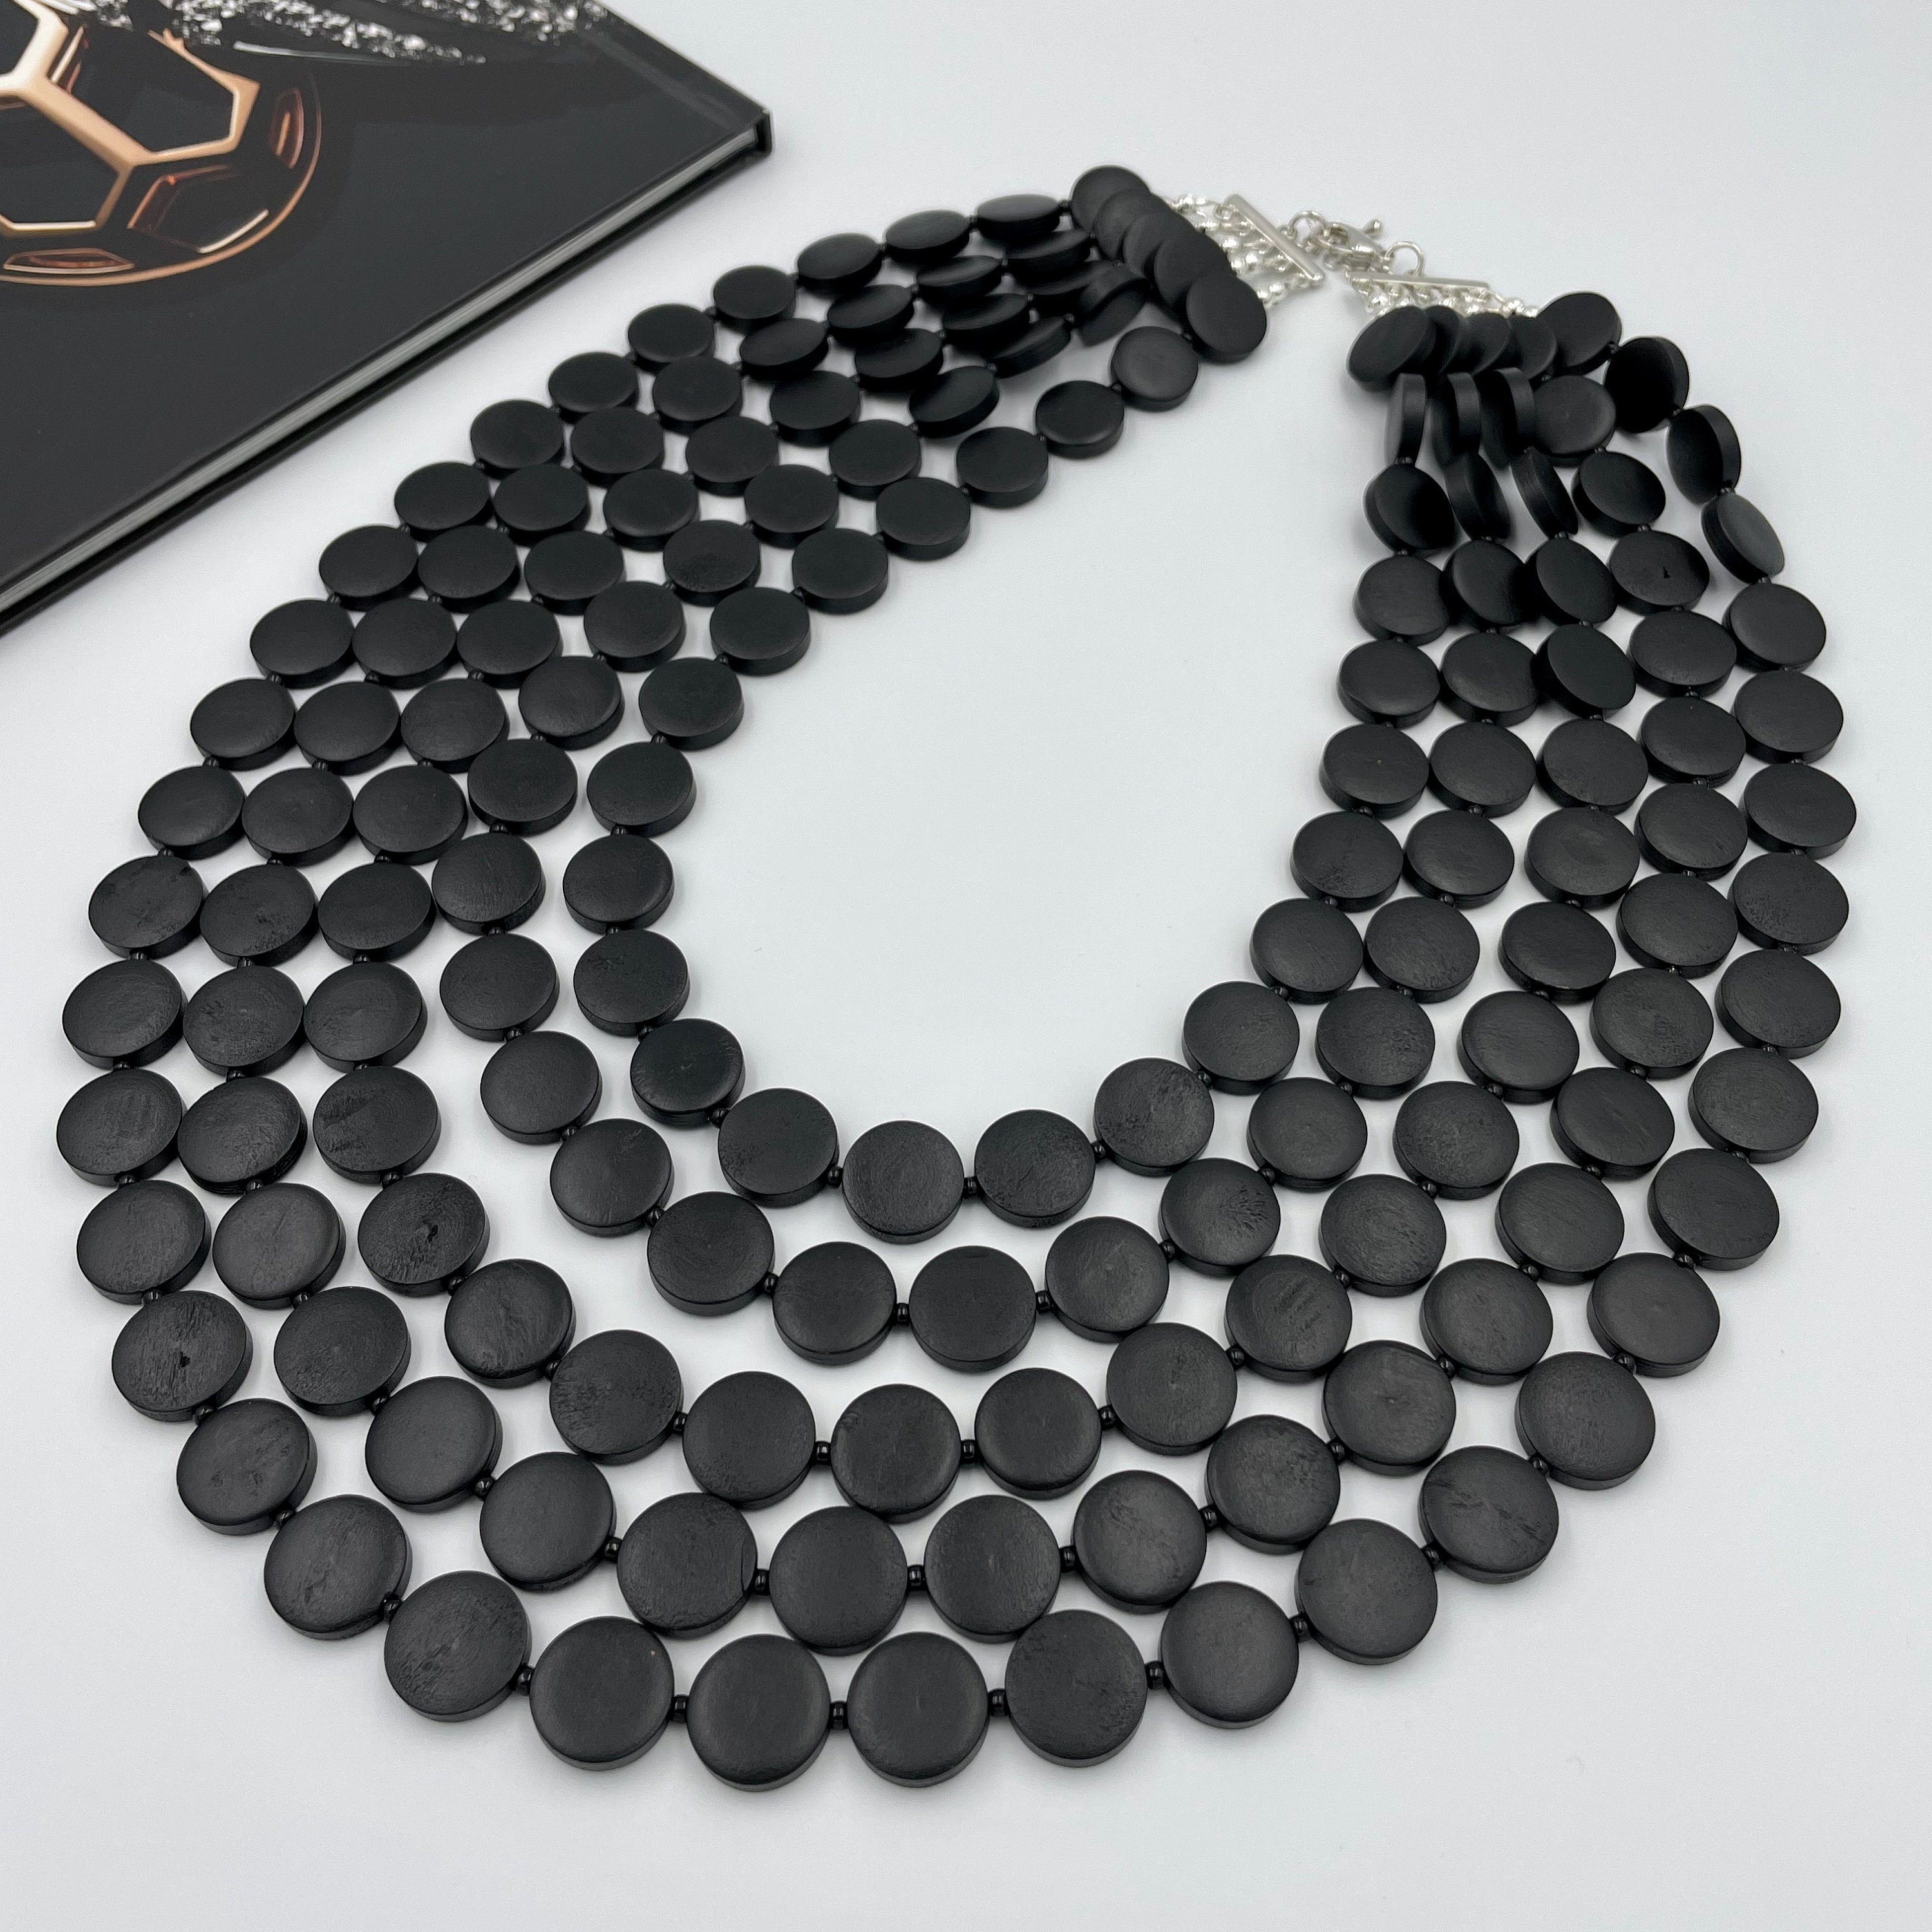 5mm black wood beads, 85pcs natural wooden beads, Round spacer beads for  jewelry making